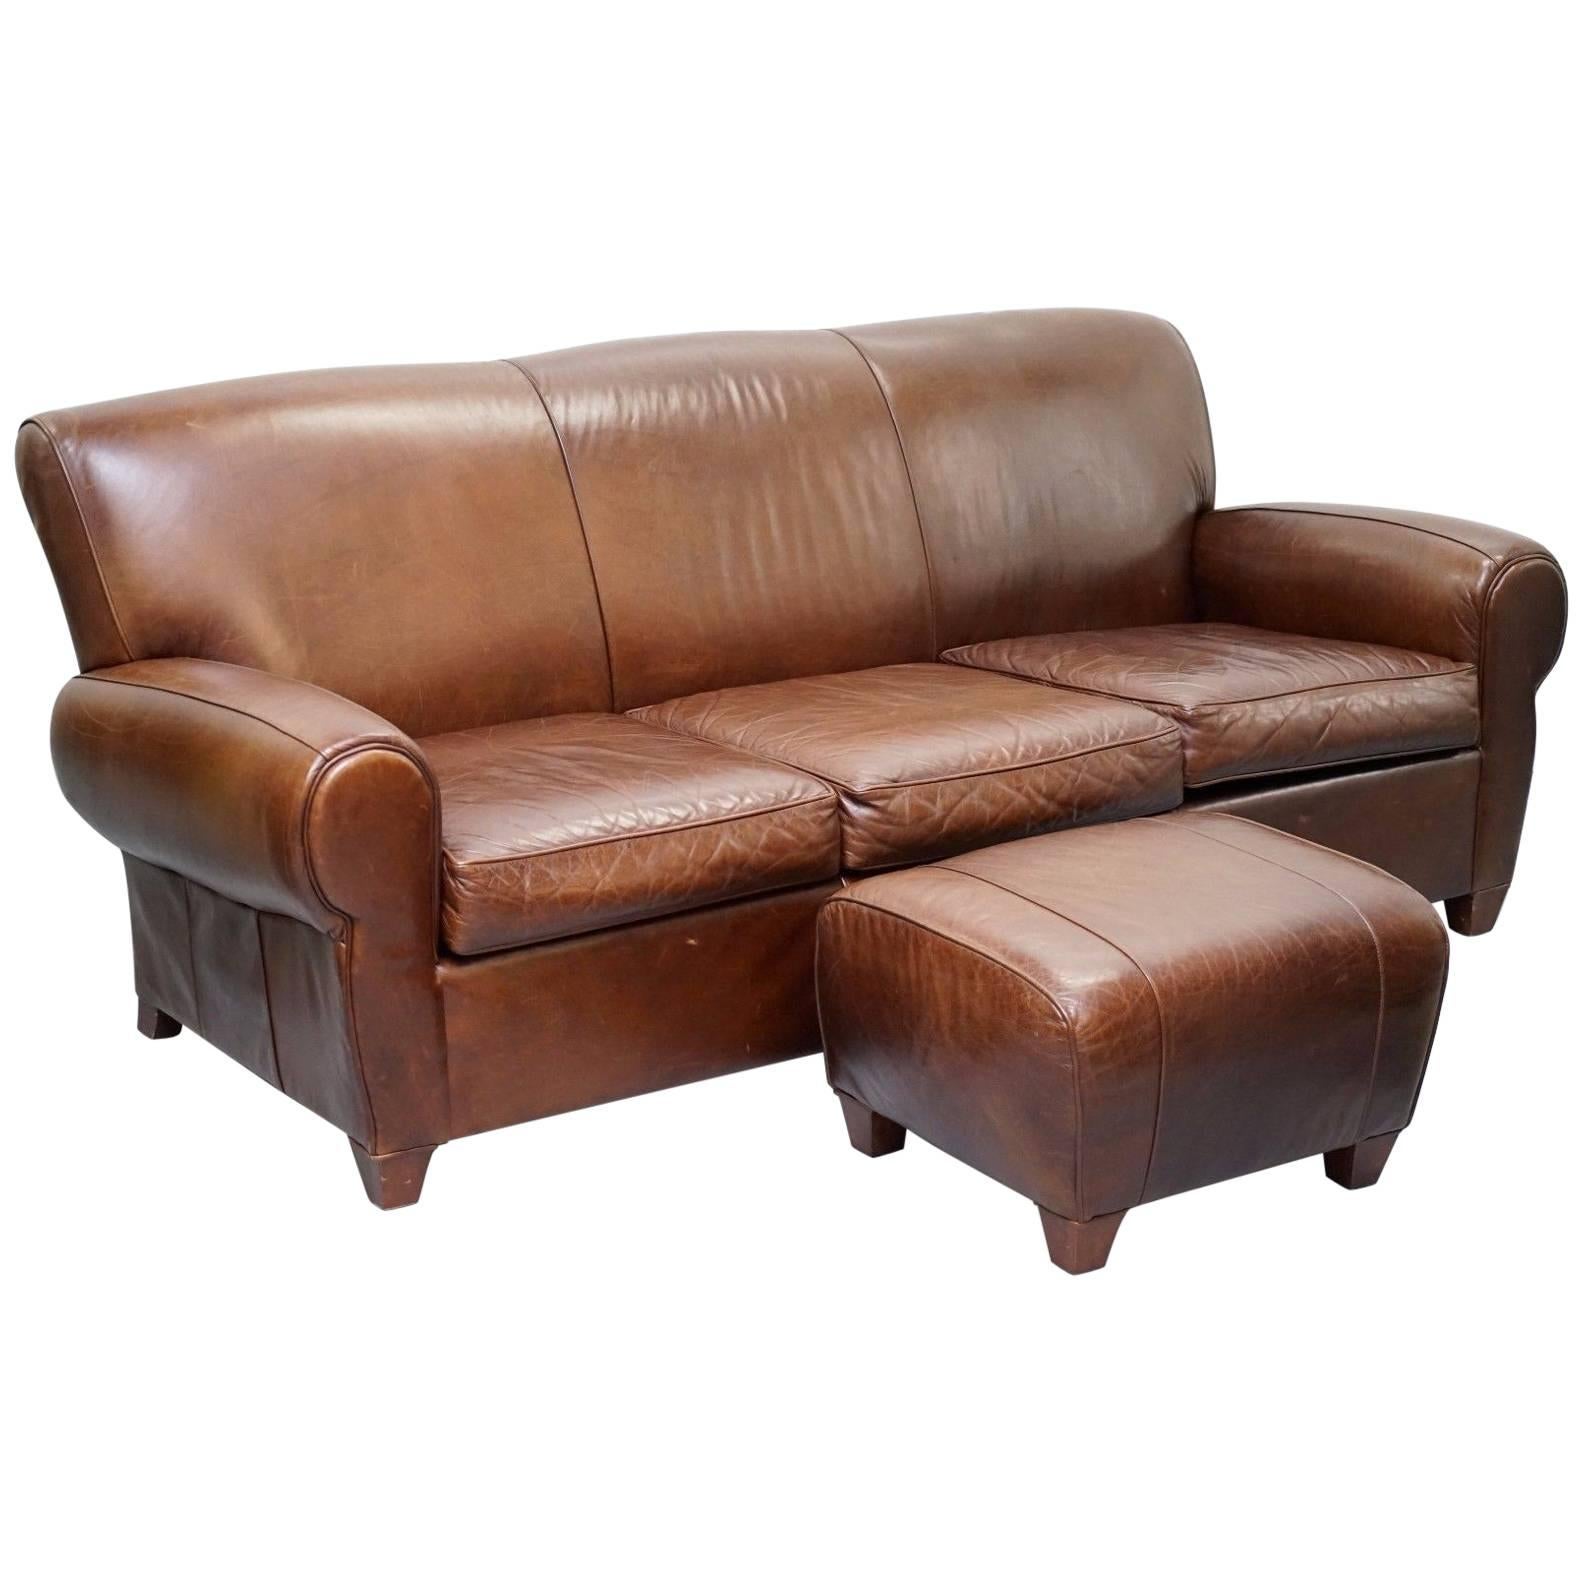 Heritage Aged Brown Distressed Leather Four Seater Sofa and Ottoman